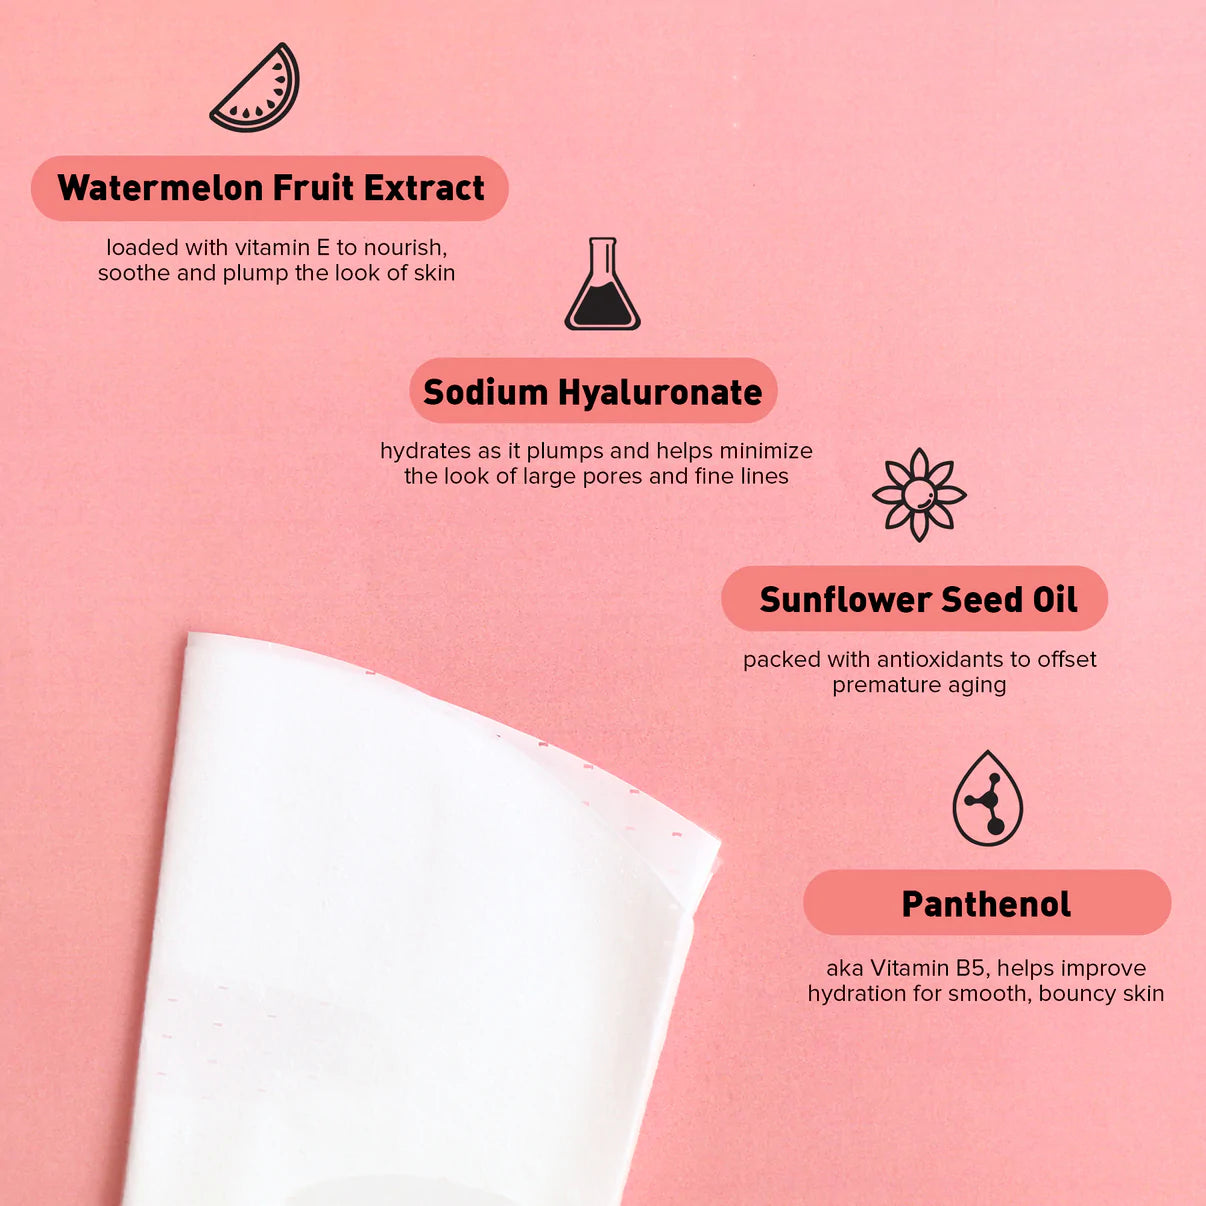 picture of the ingredients in the mask with a watermelon, beaker, sunflower, element icon representing a watermelon fruit extract, sodium hyaluronate, sunflower seed oil, and panthenol